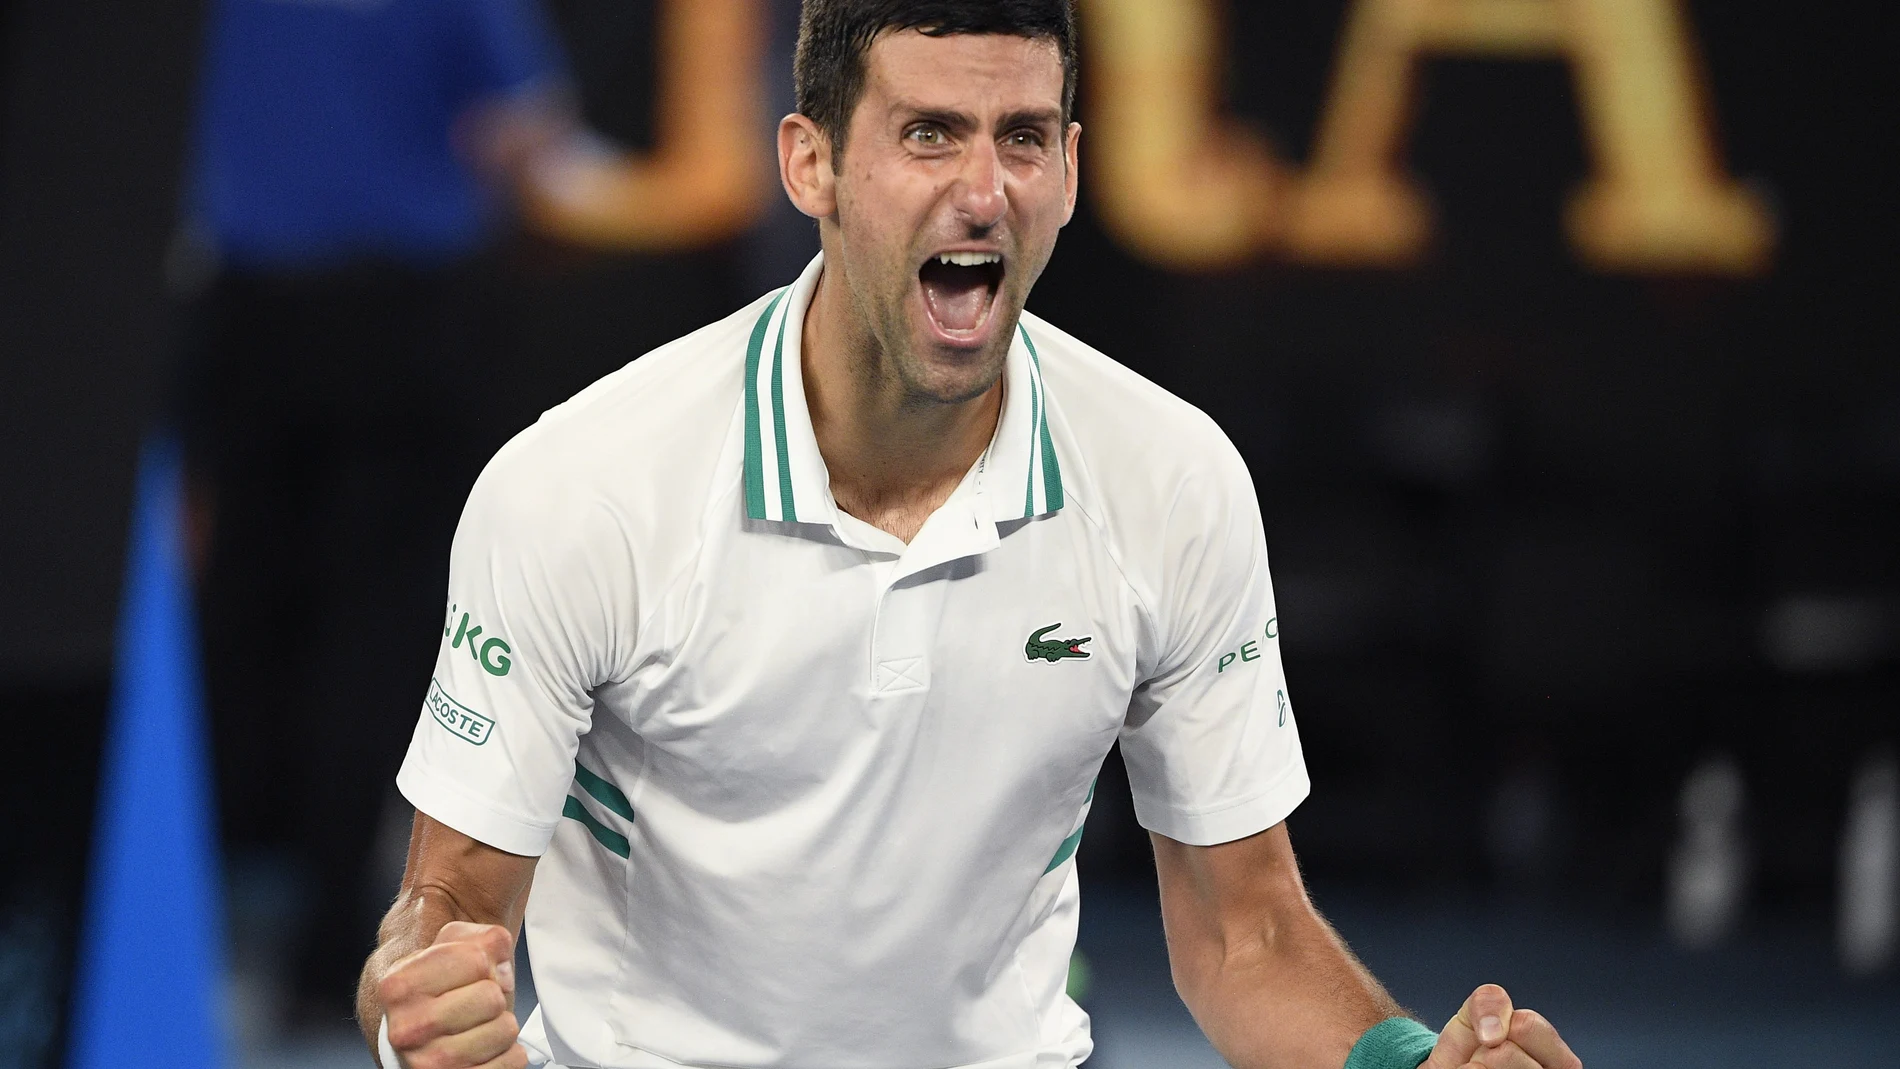 File-This Feb. 21, 2021, file photo shows Serbia's Novak Djokovic celebrating after defeating Russia's Daniil Medvedev in the men's singles final at the Australian Open tennis championship in Melbourne, Australia. No. 1-ranked Djokovic has pulled out of the upcoming Miami Open, joining Rafael Nadal and Roger Federer on the sideline. Djokovic says that with the current coronavirus restrictions, he needs to find balance in his time on tour and at home. (AP Photo/Andy Brownbill, File)